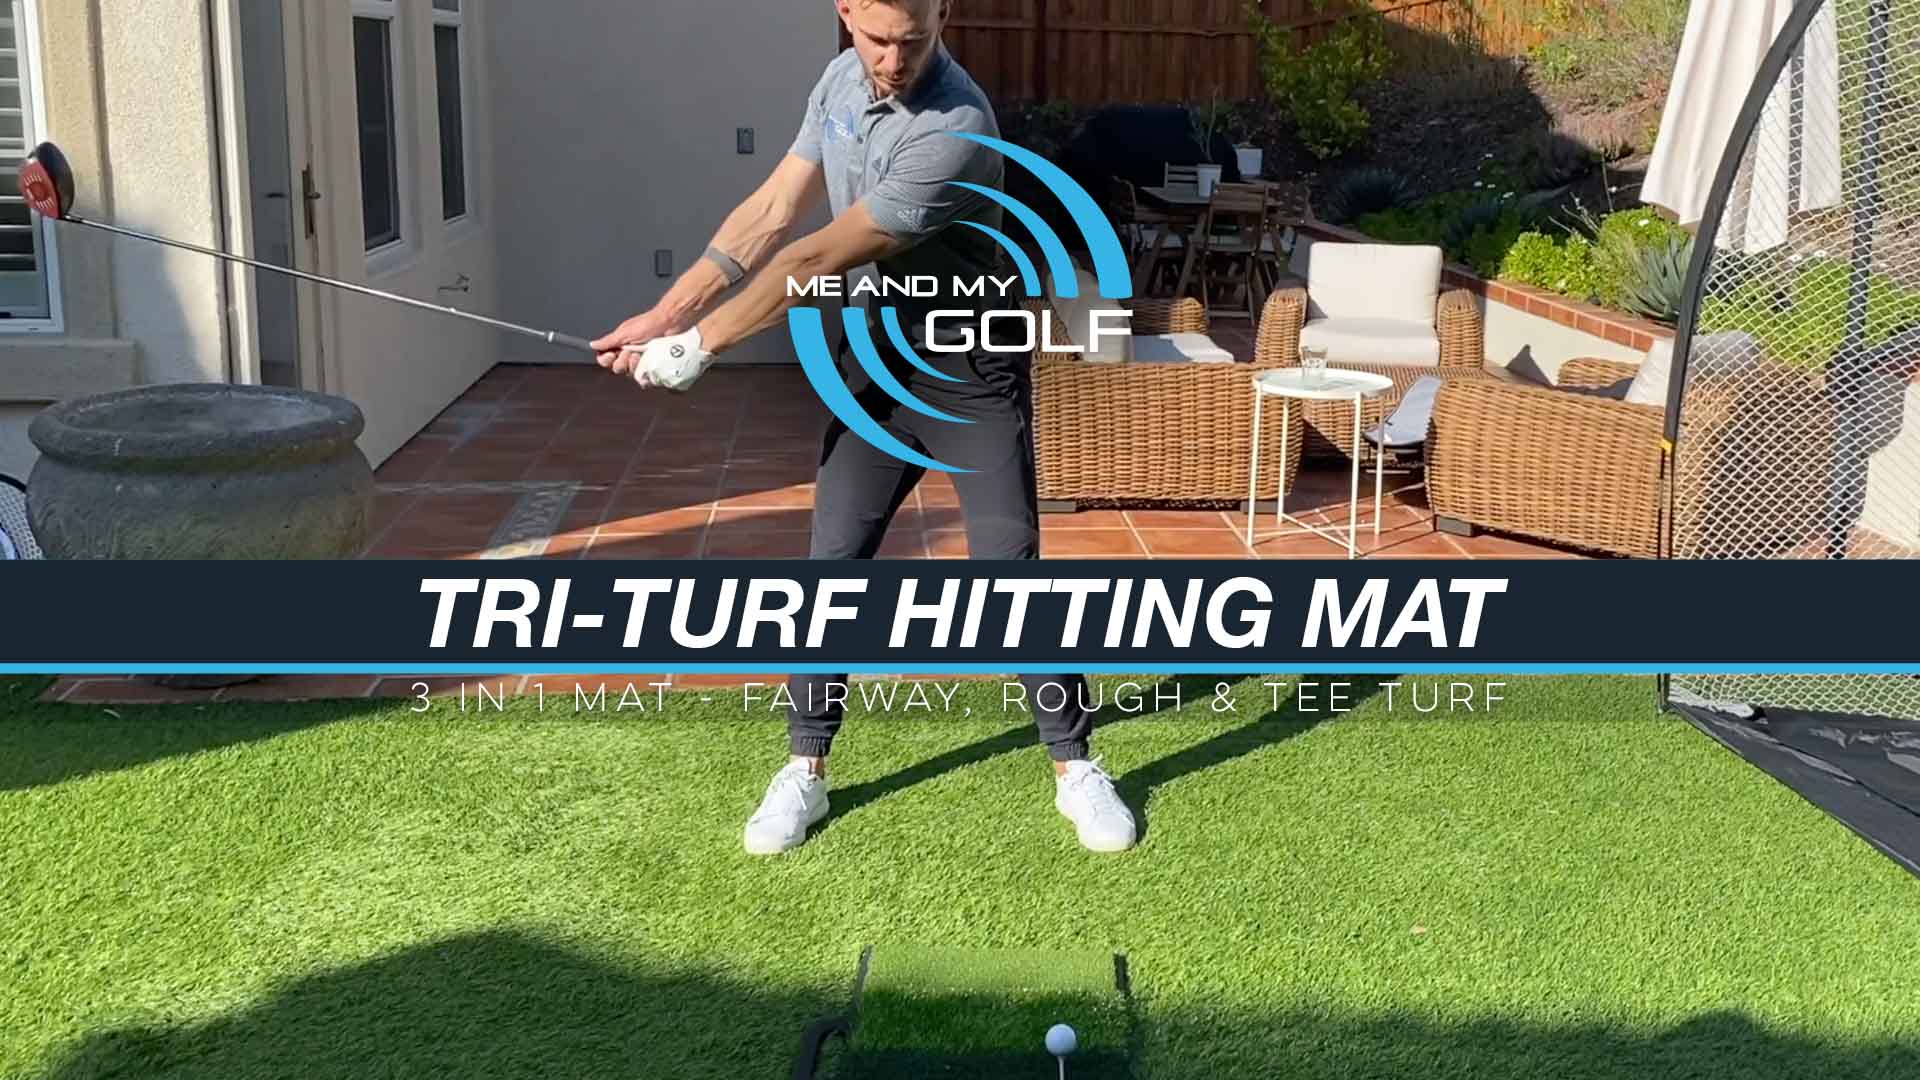 Me And My Golf - Training Aids - Hitting Mat